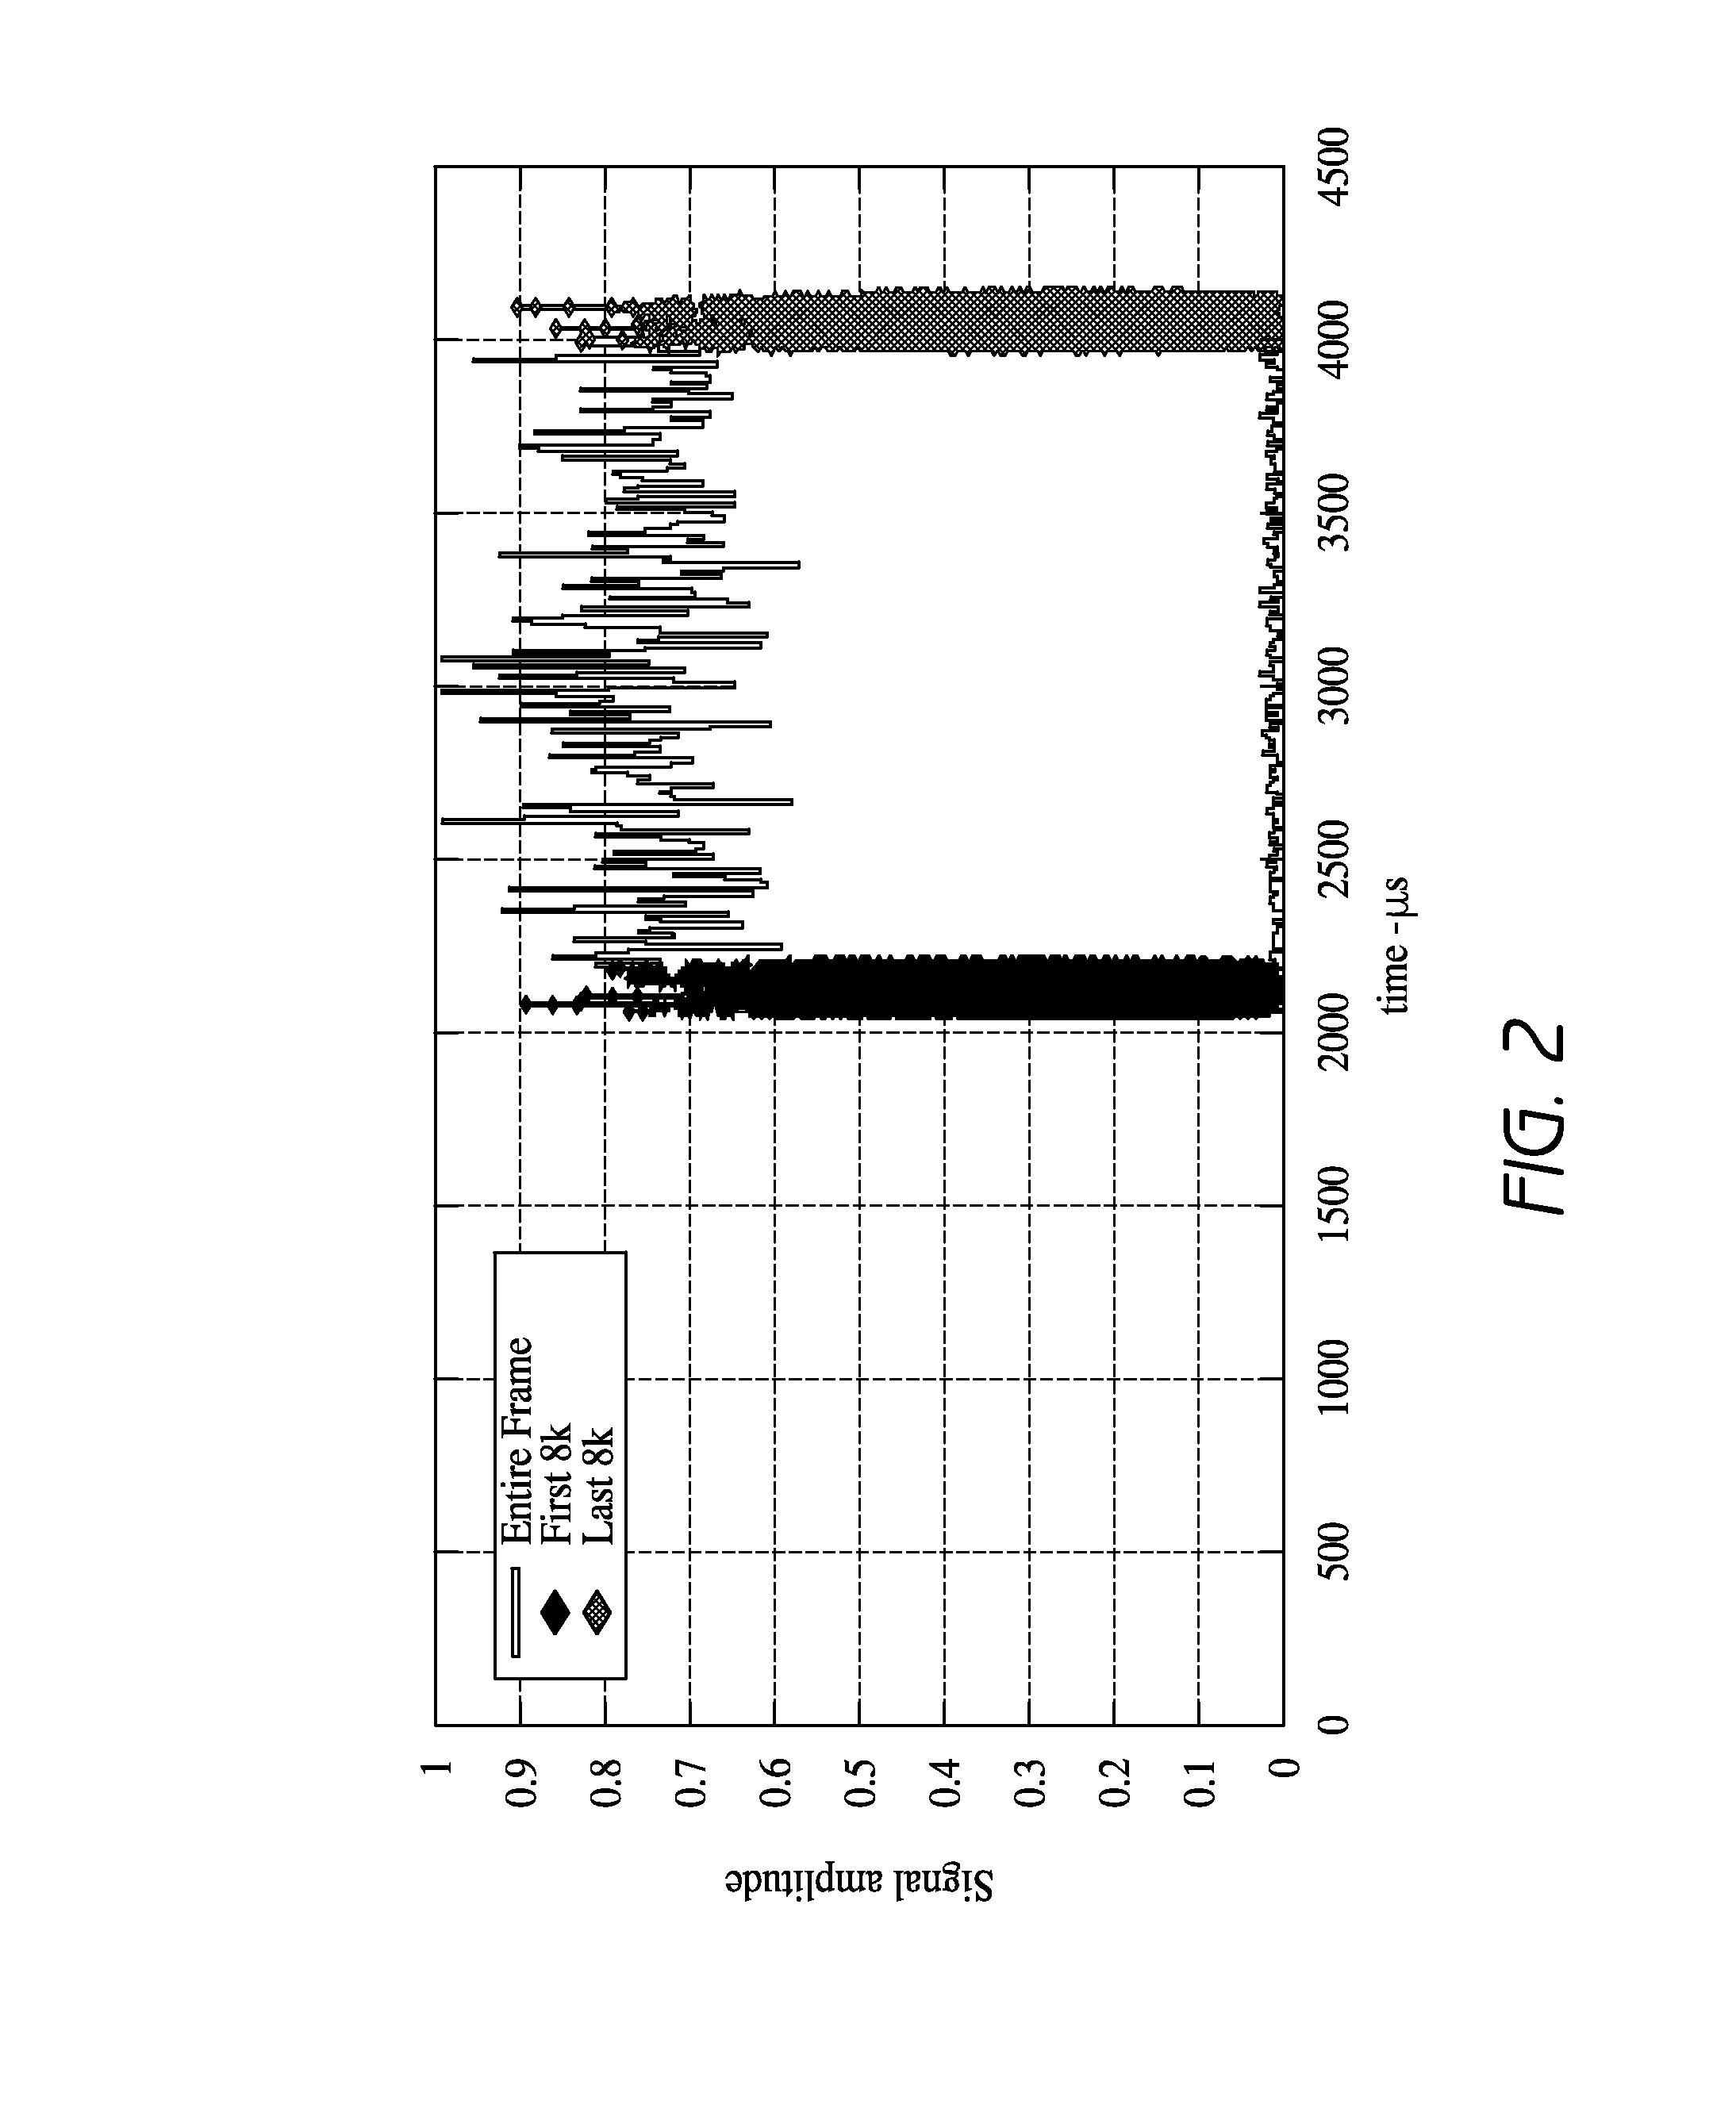 Adaptive predistortion of non-linear amplifiers with burst data